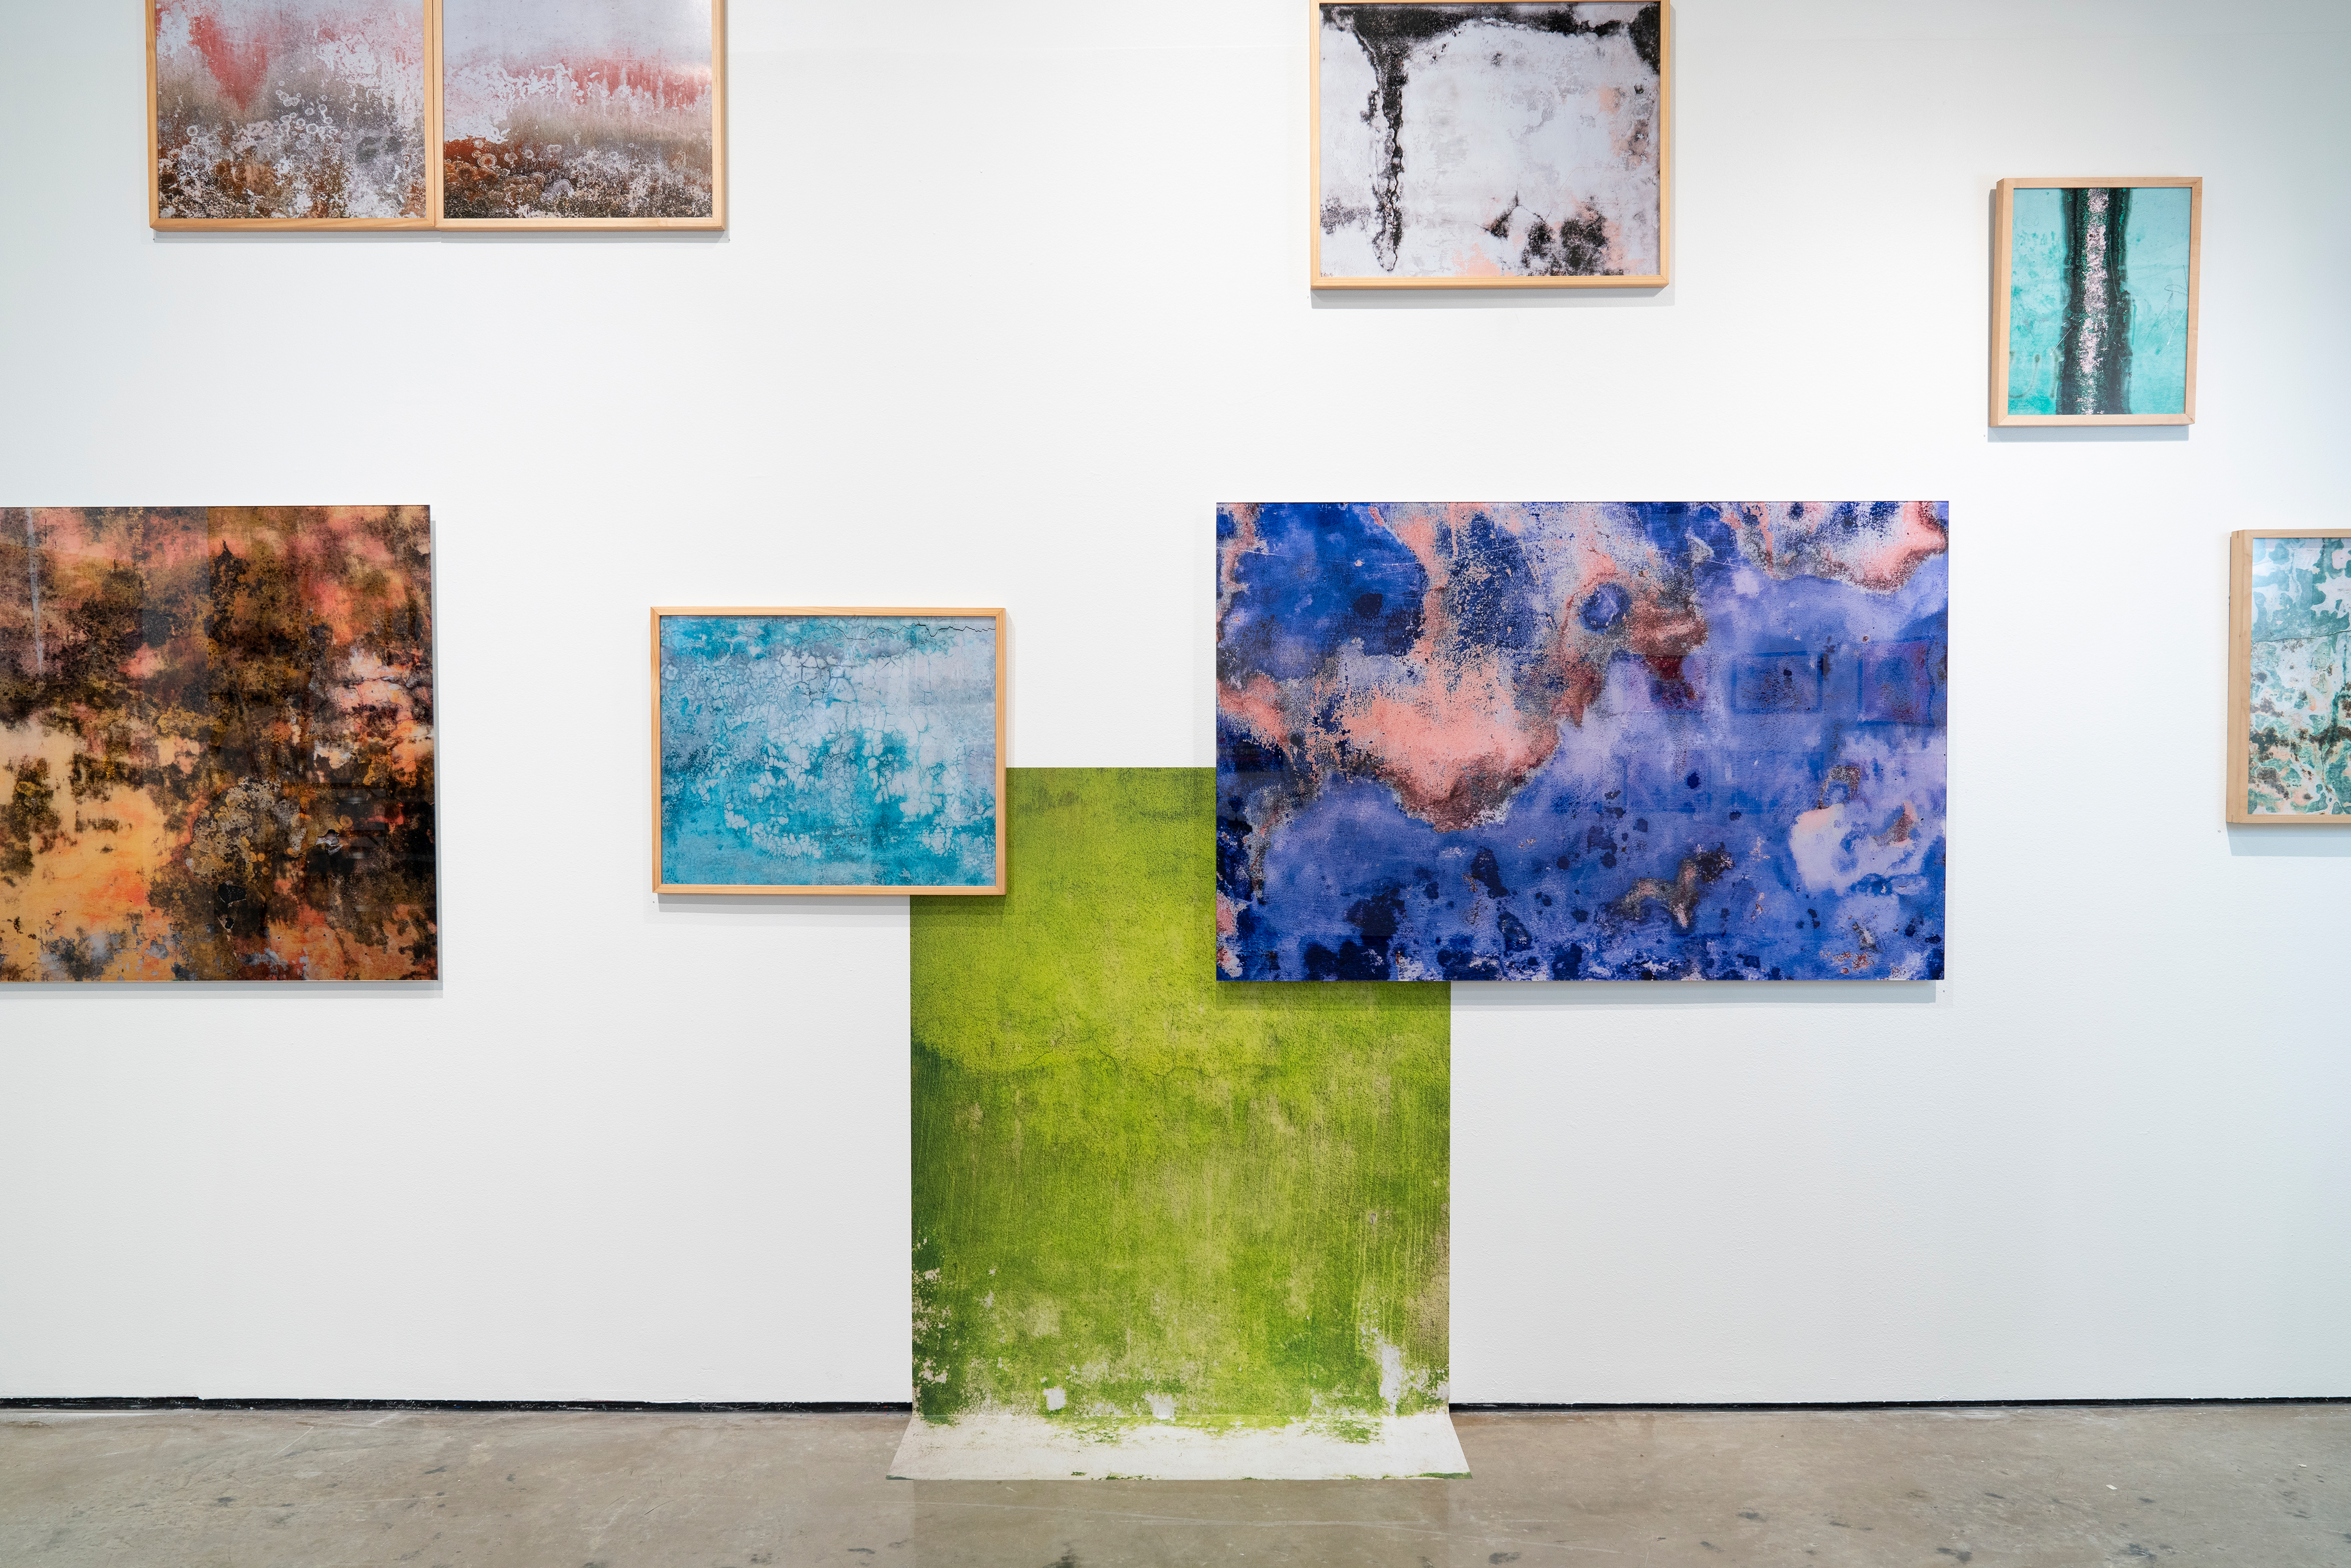 Jorge Villarreal, (Installation View, from left to right), Larimar and Ametrine, 2017 - 2018, UV Curable Ink on Acrylic, Dimensions variable